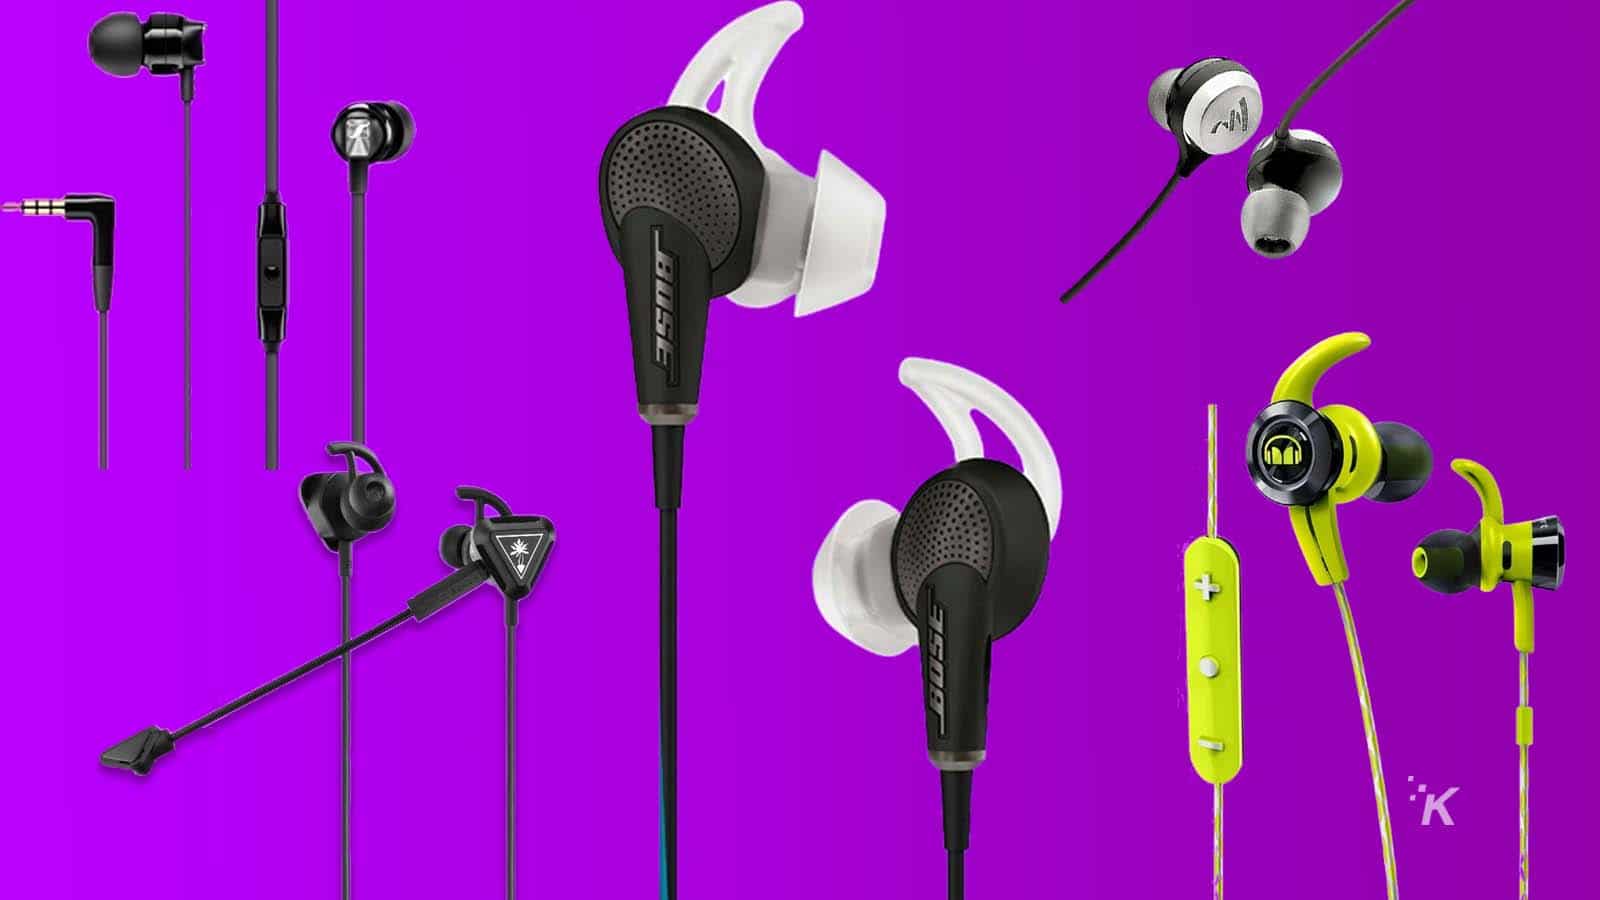 The best gaming earbuds for PS4 and Xbox One